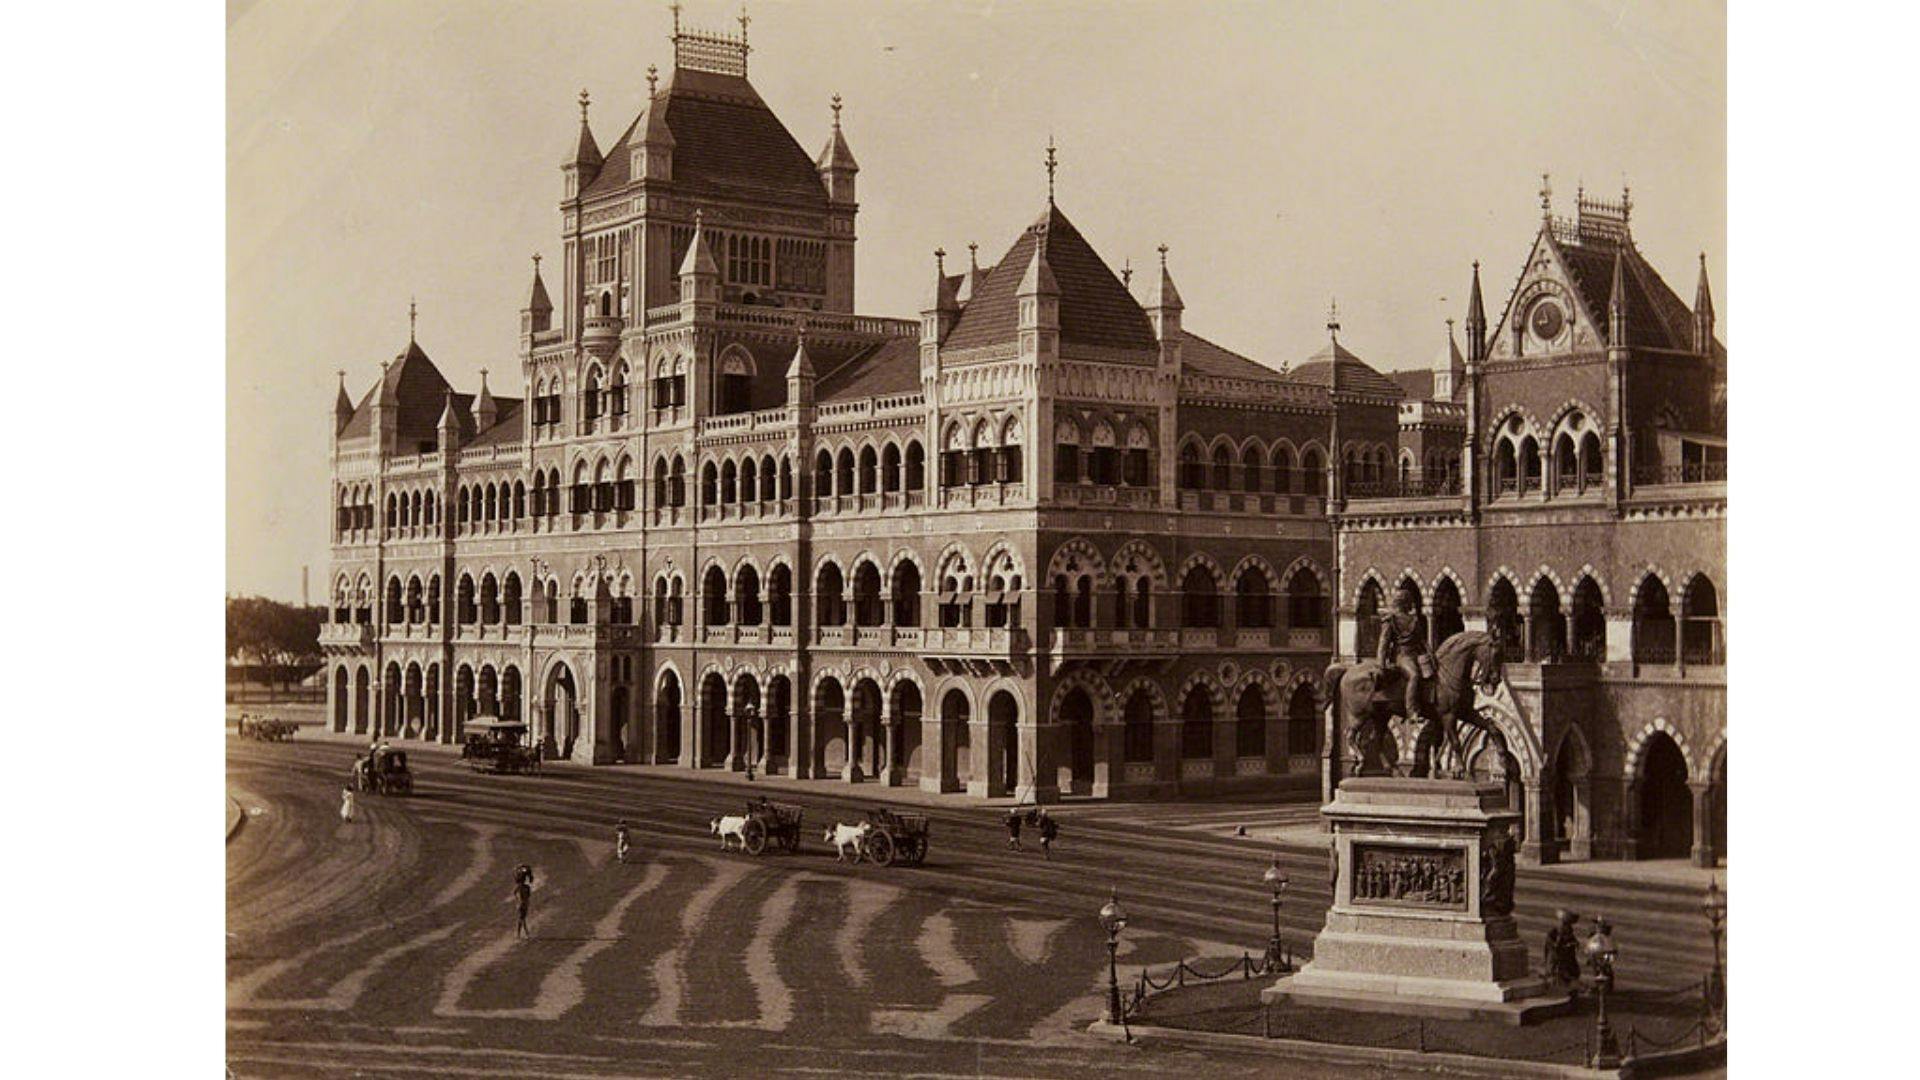 Elphinstone College in the late 19th century